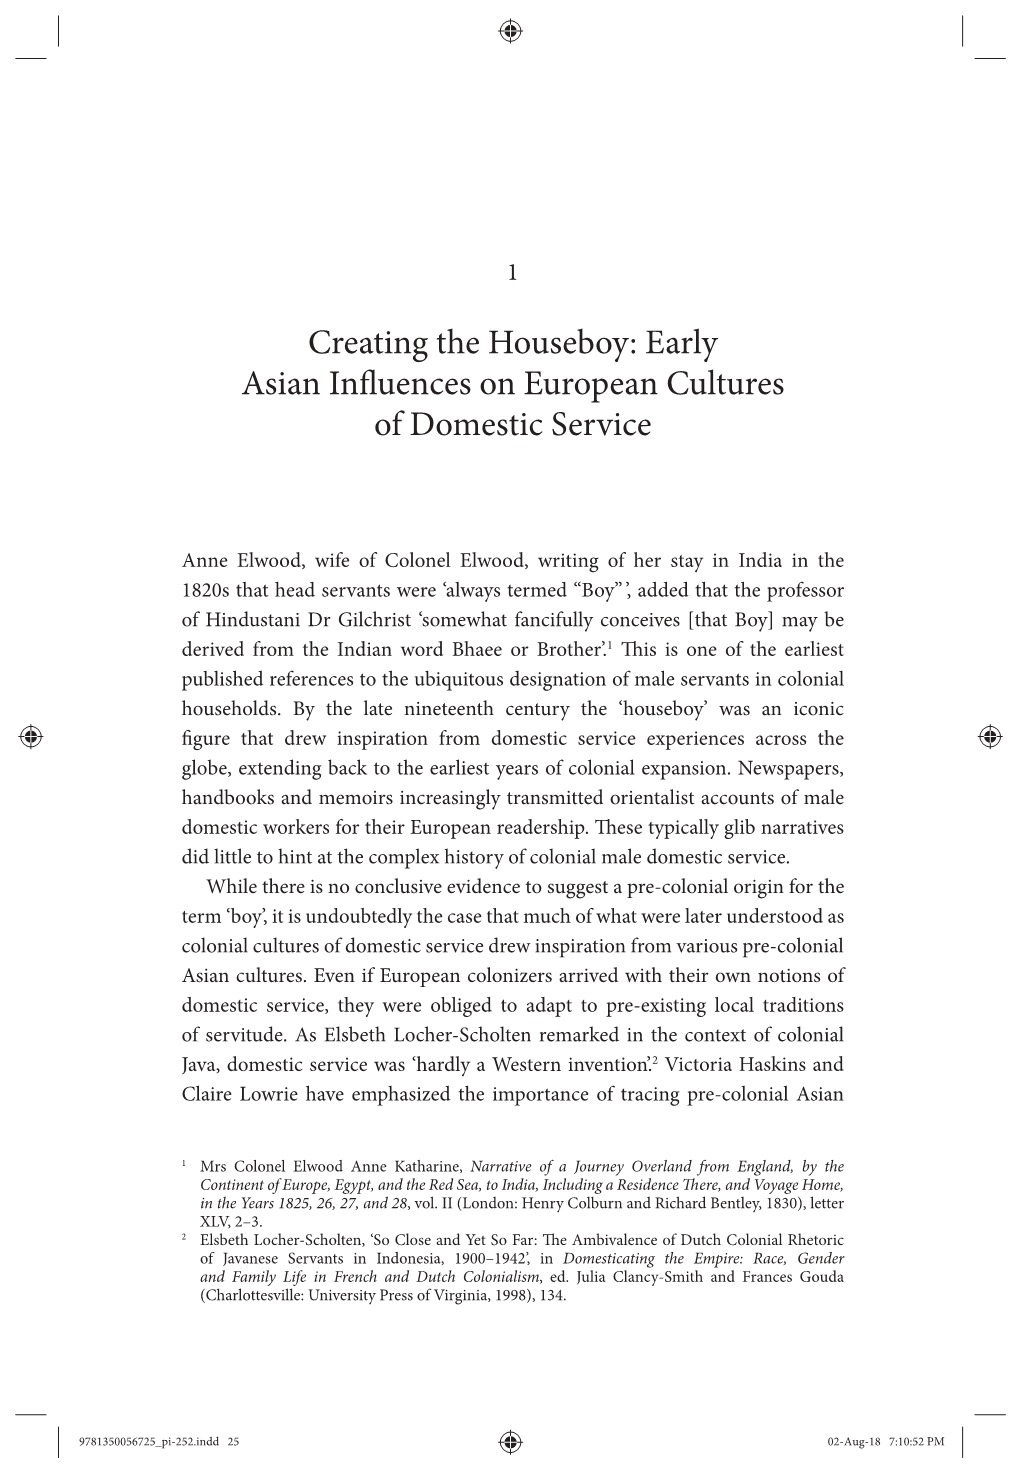 Creating the Houseboy: Early Asian Influences on European Cultures of Domestic Service